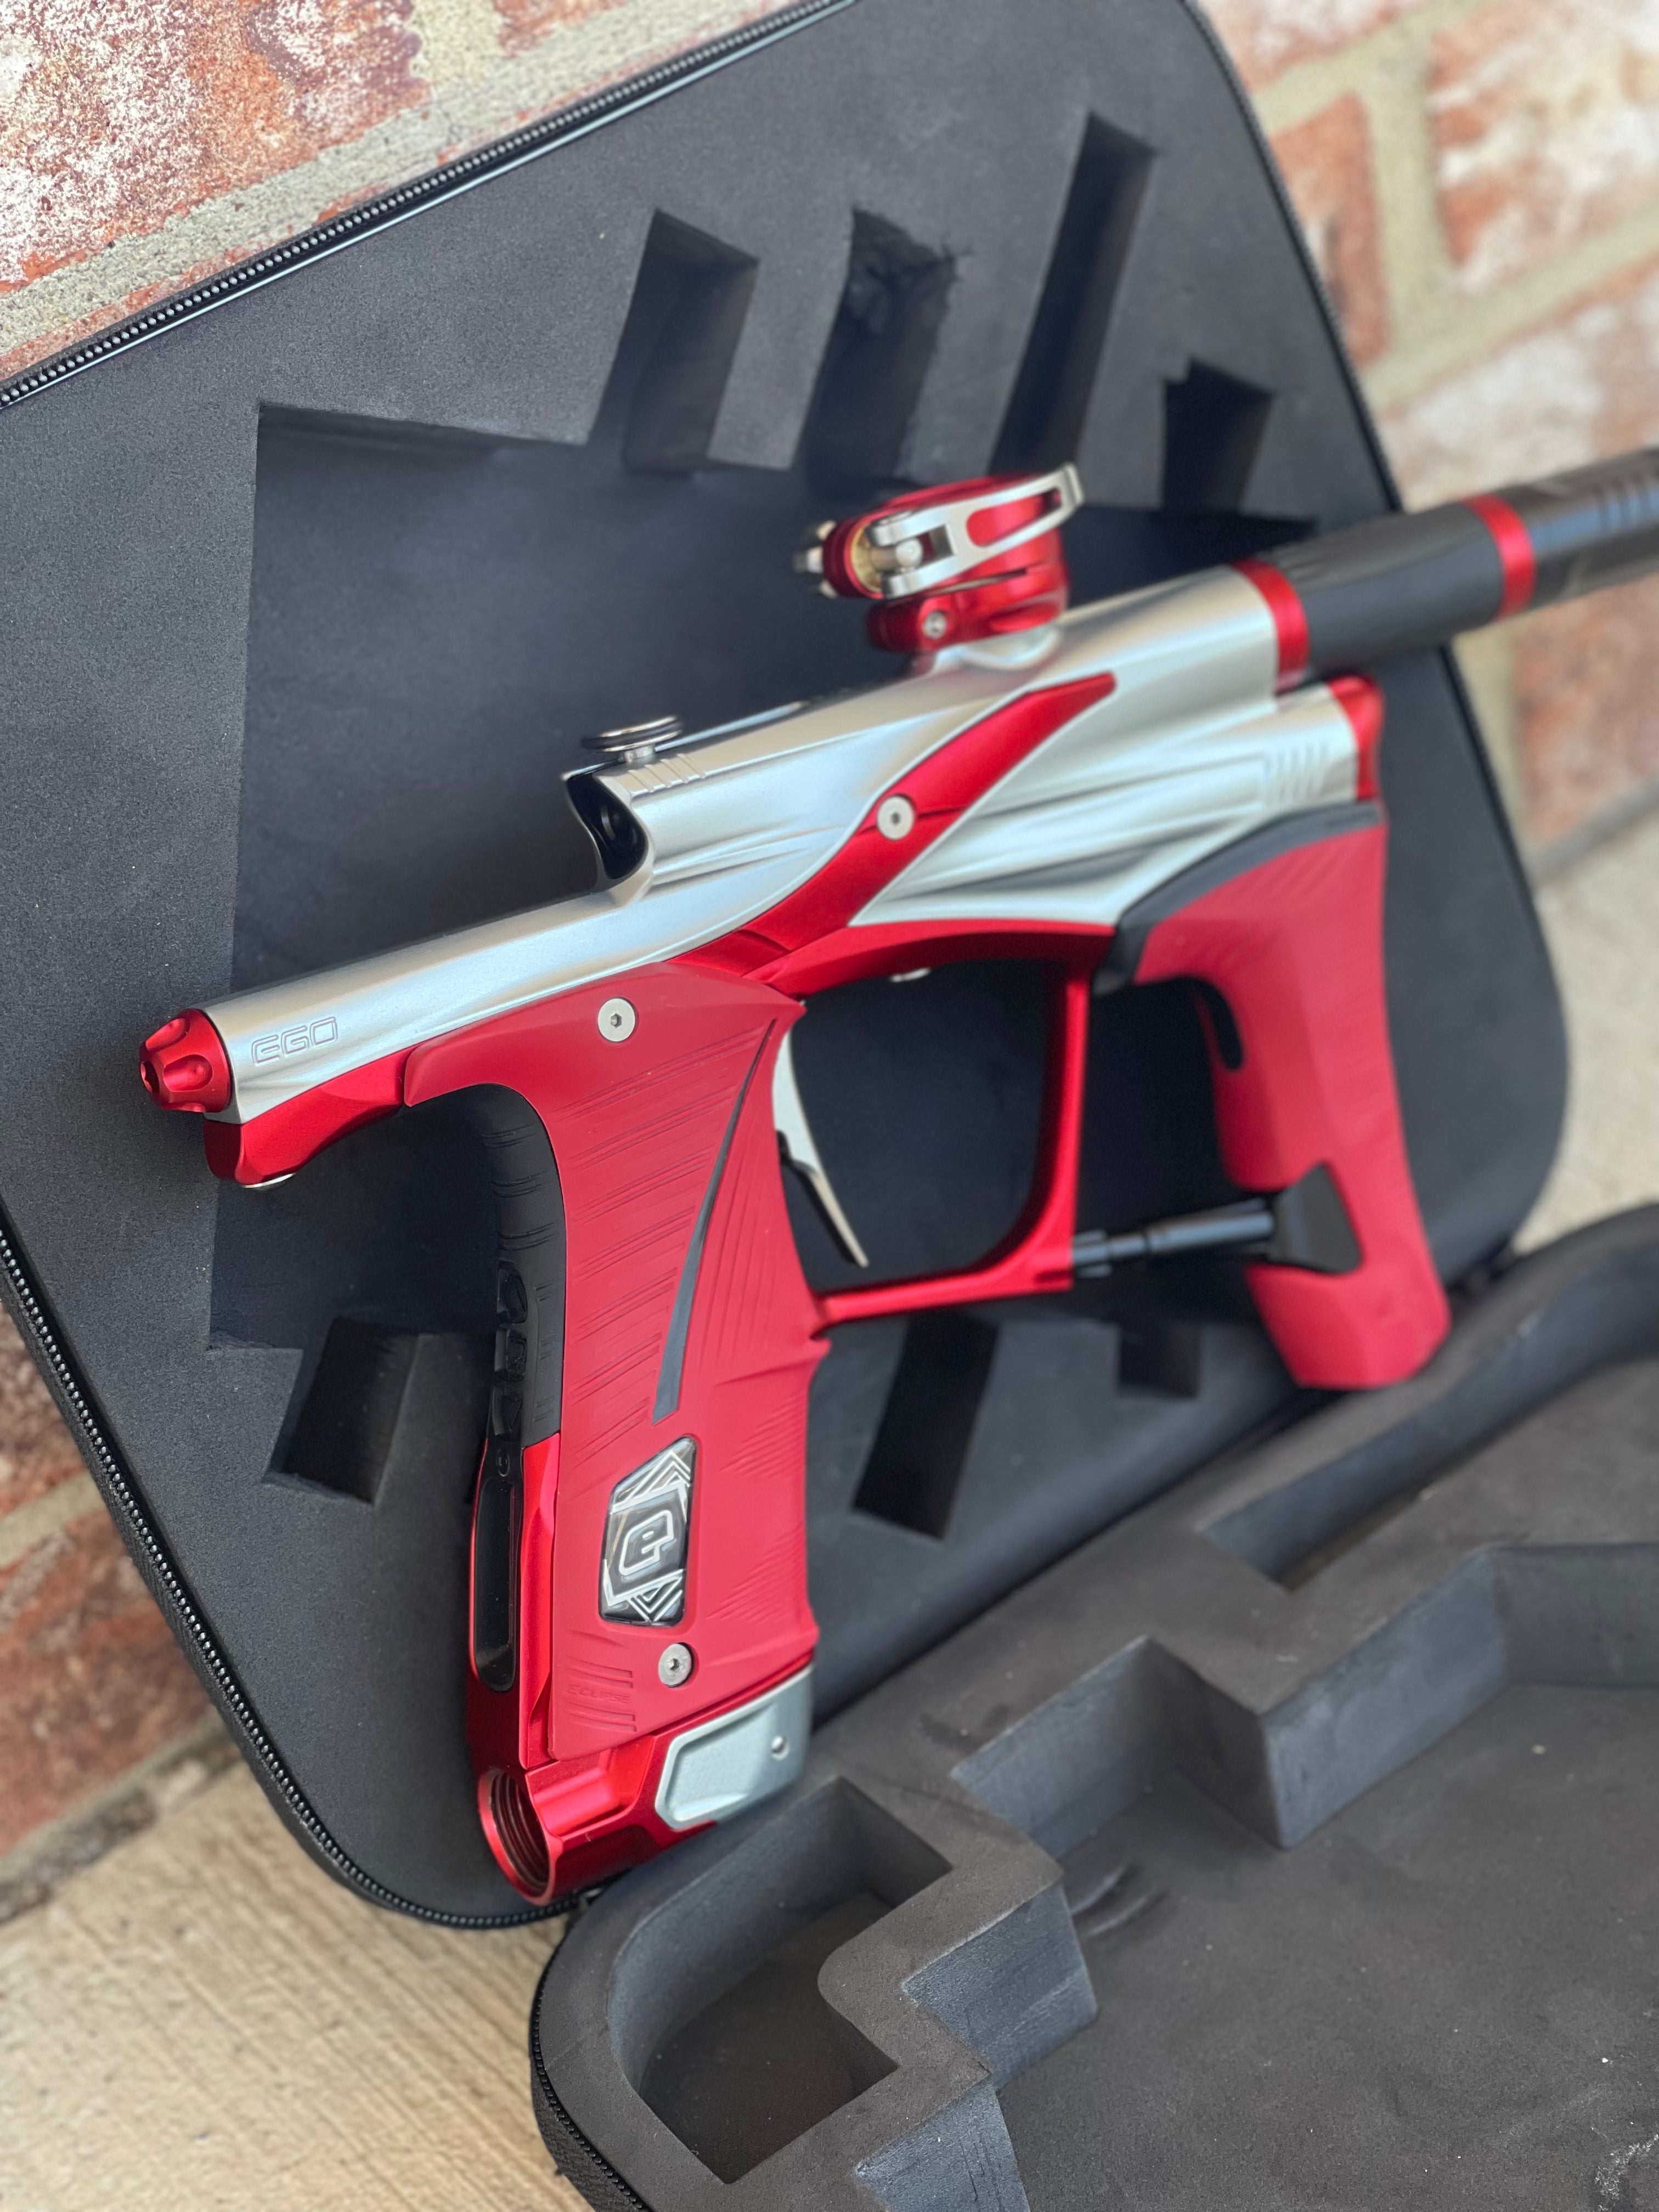 Planet Eclipse Ego LV1.6 Paintball Gun - Silver/Red – Punishers Paintball